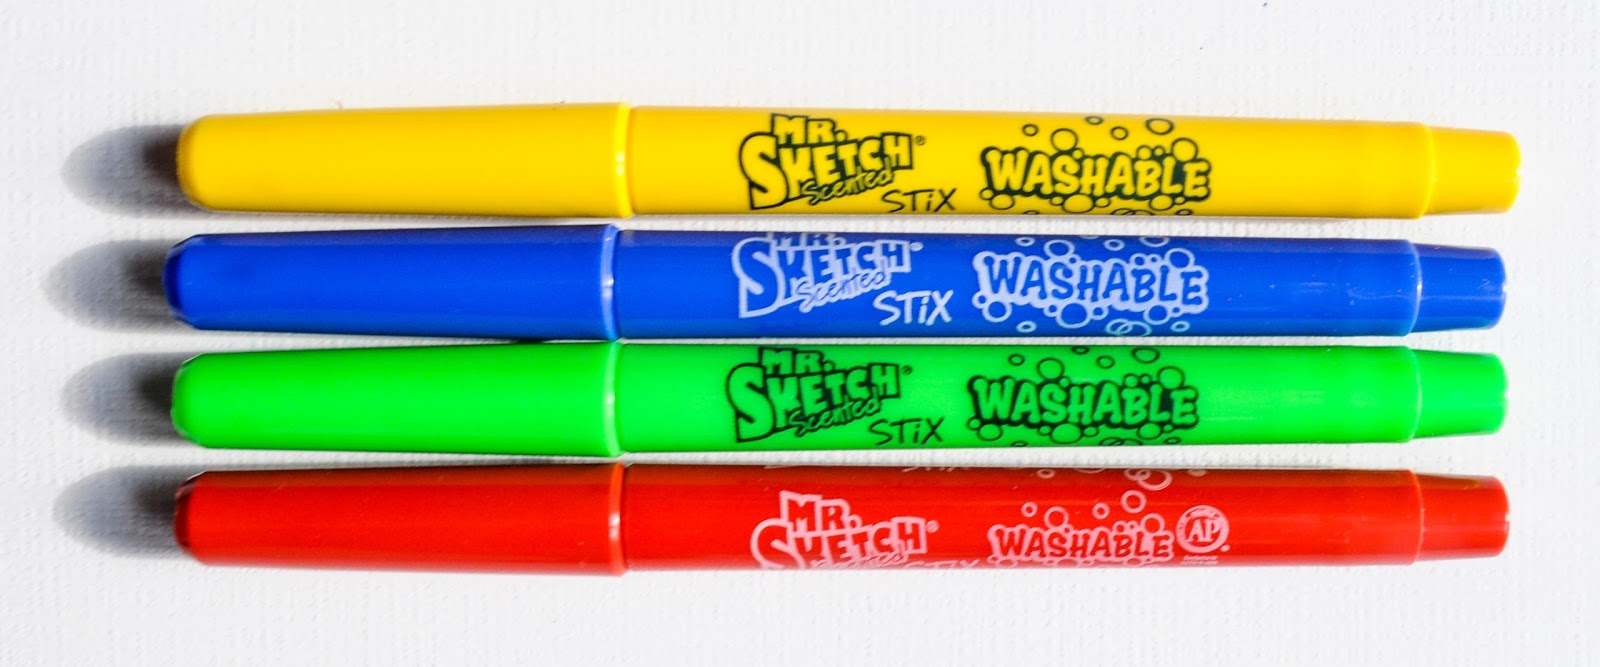 4 Count Mr Sketch Scented Washable Stix Markers: What's Inside the 